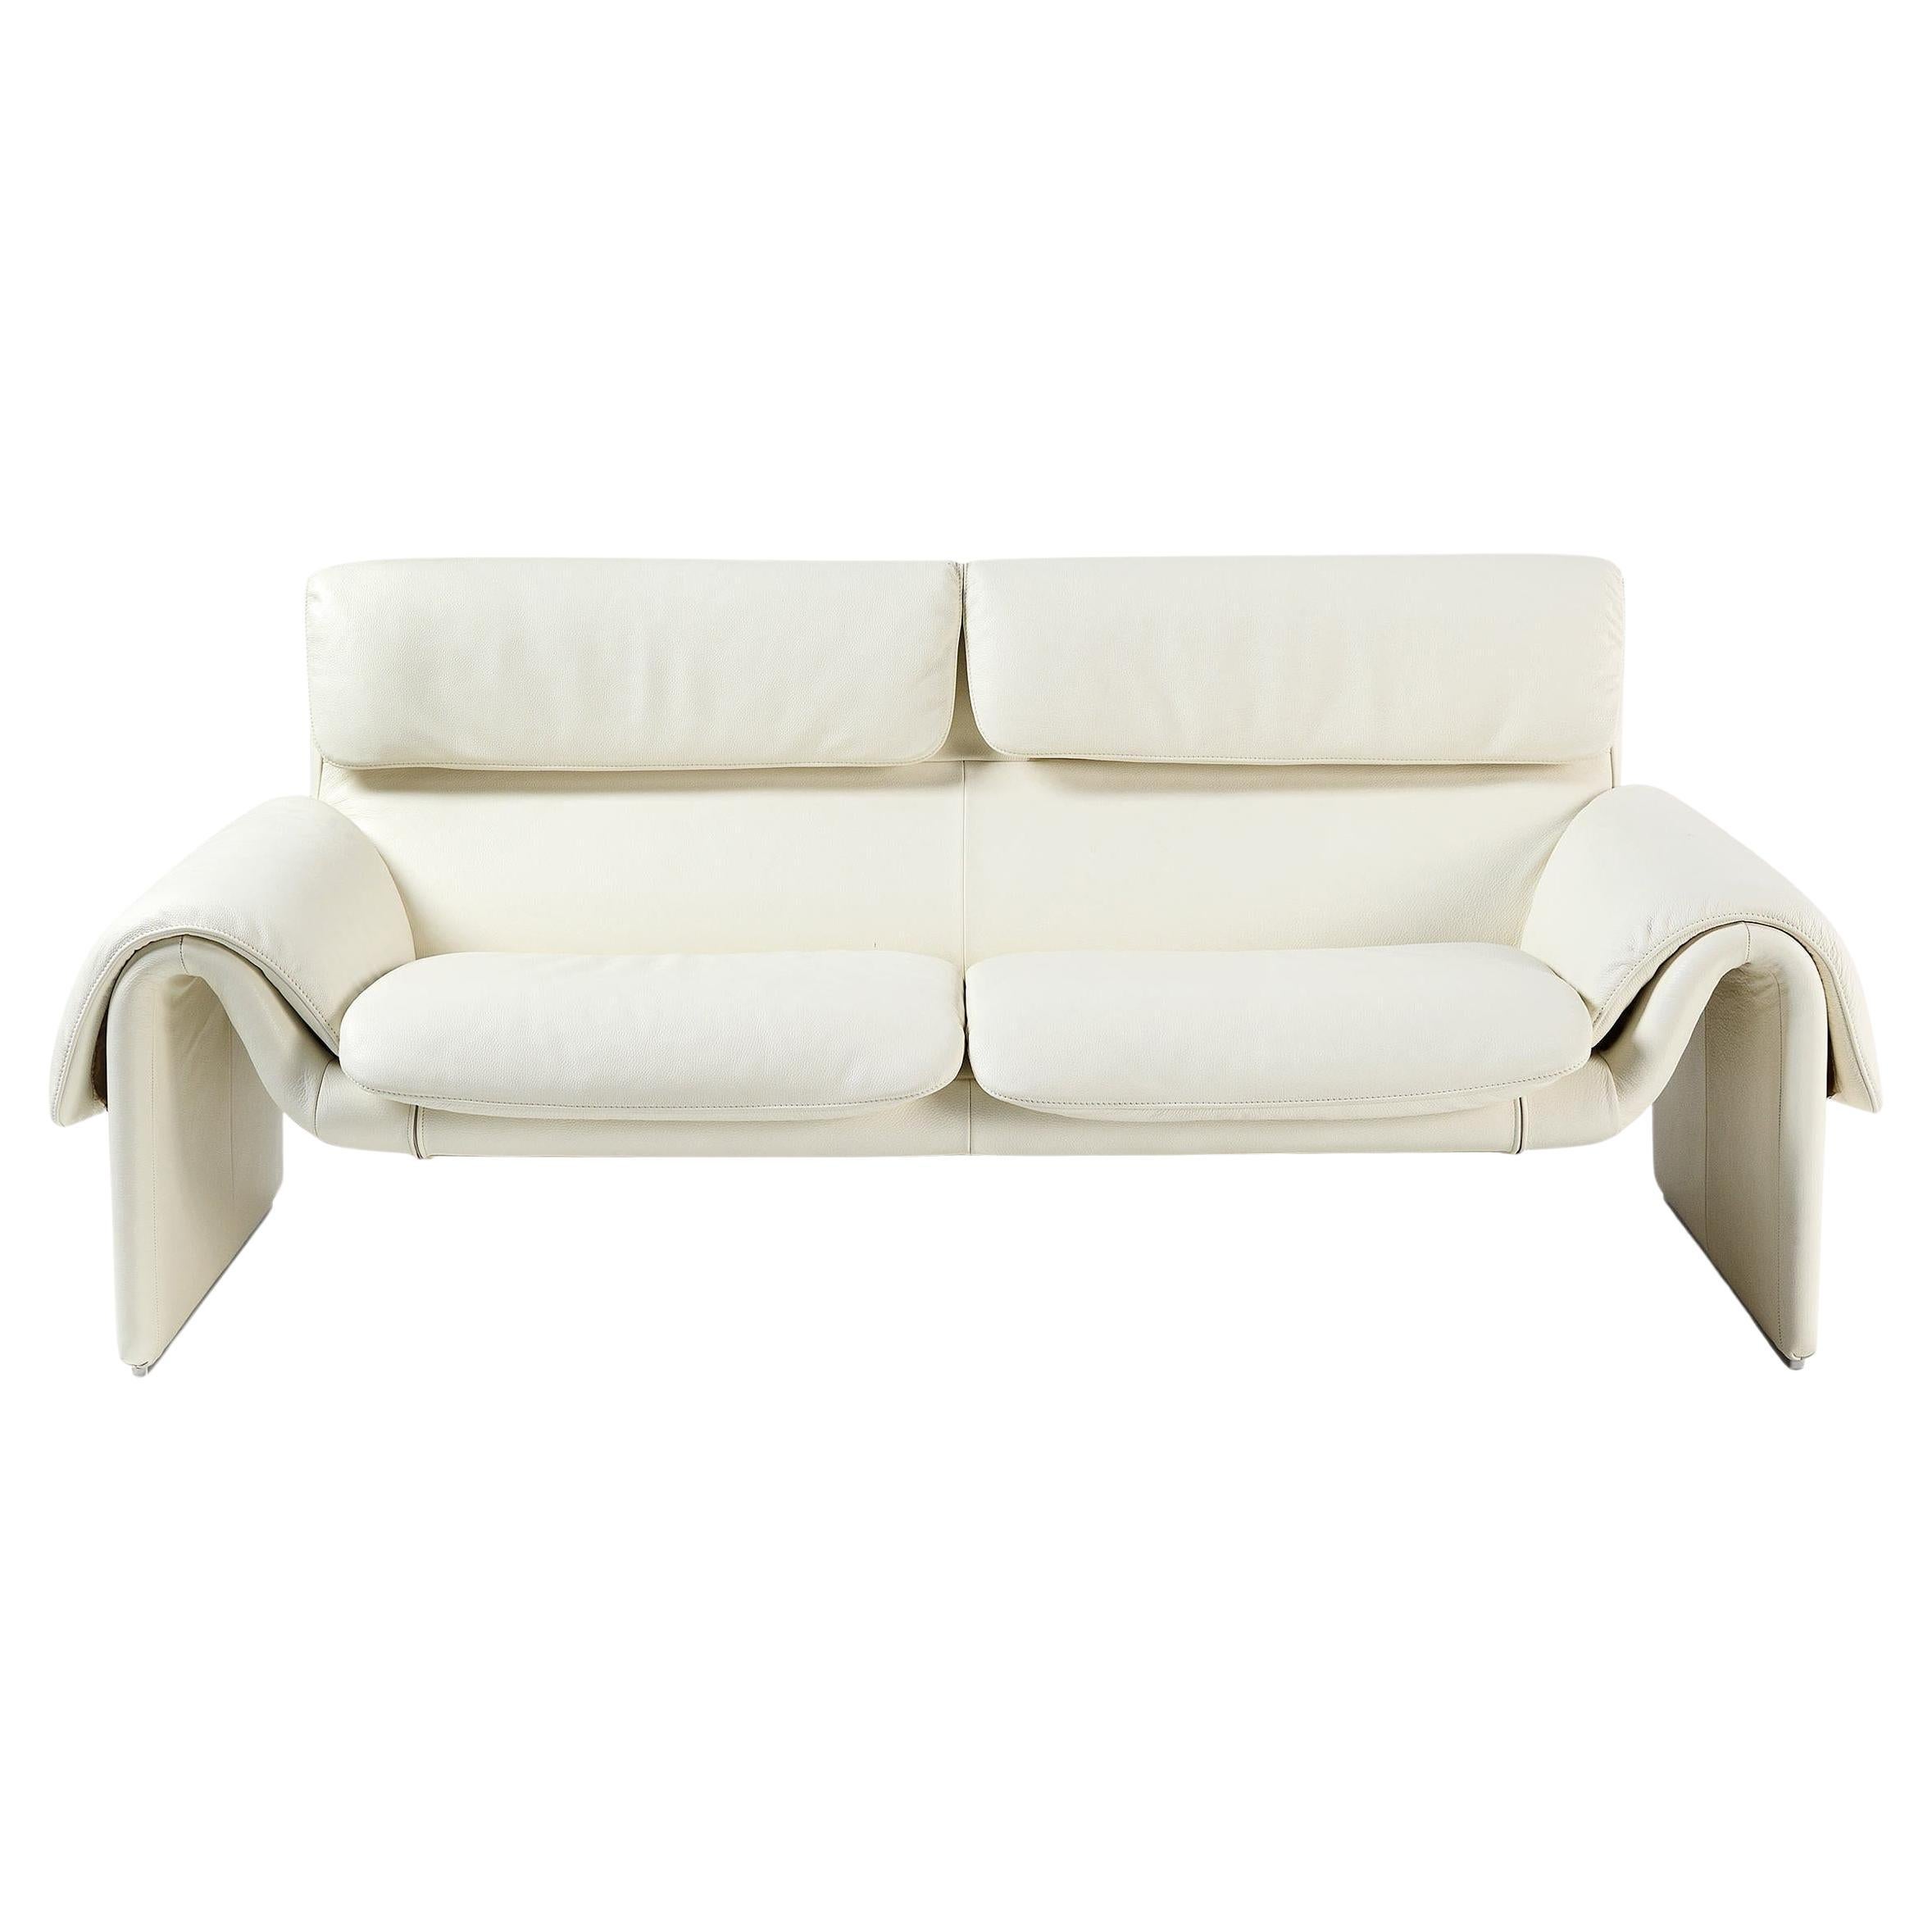 De Sede DS-2011 Two-Seater Sofa in Snow Upholstery by De Sede Design Team For Sale